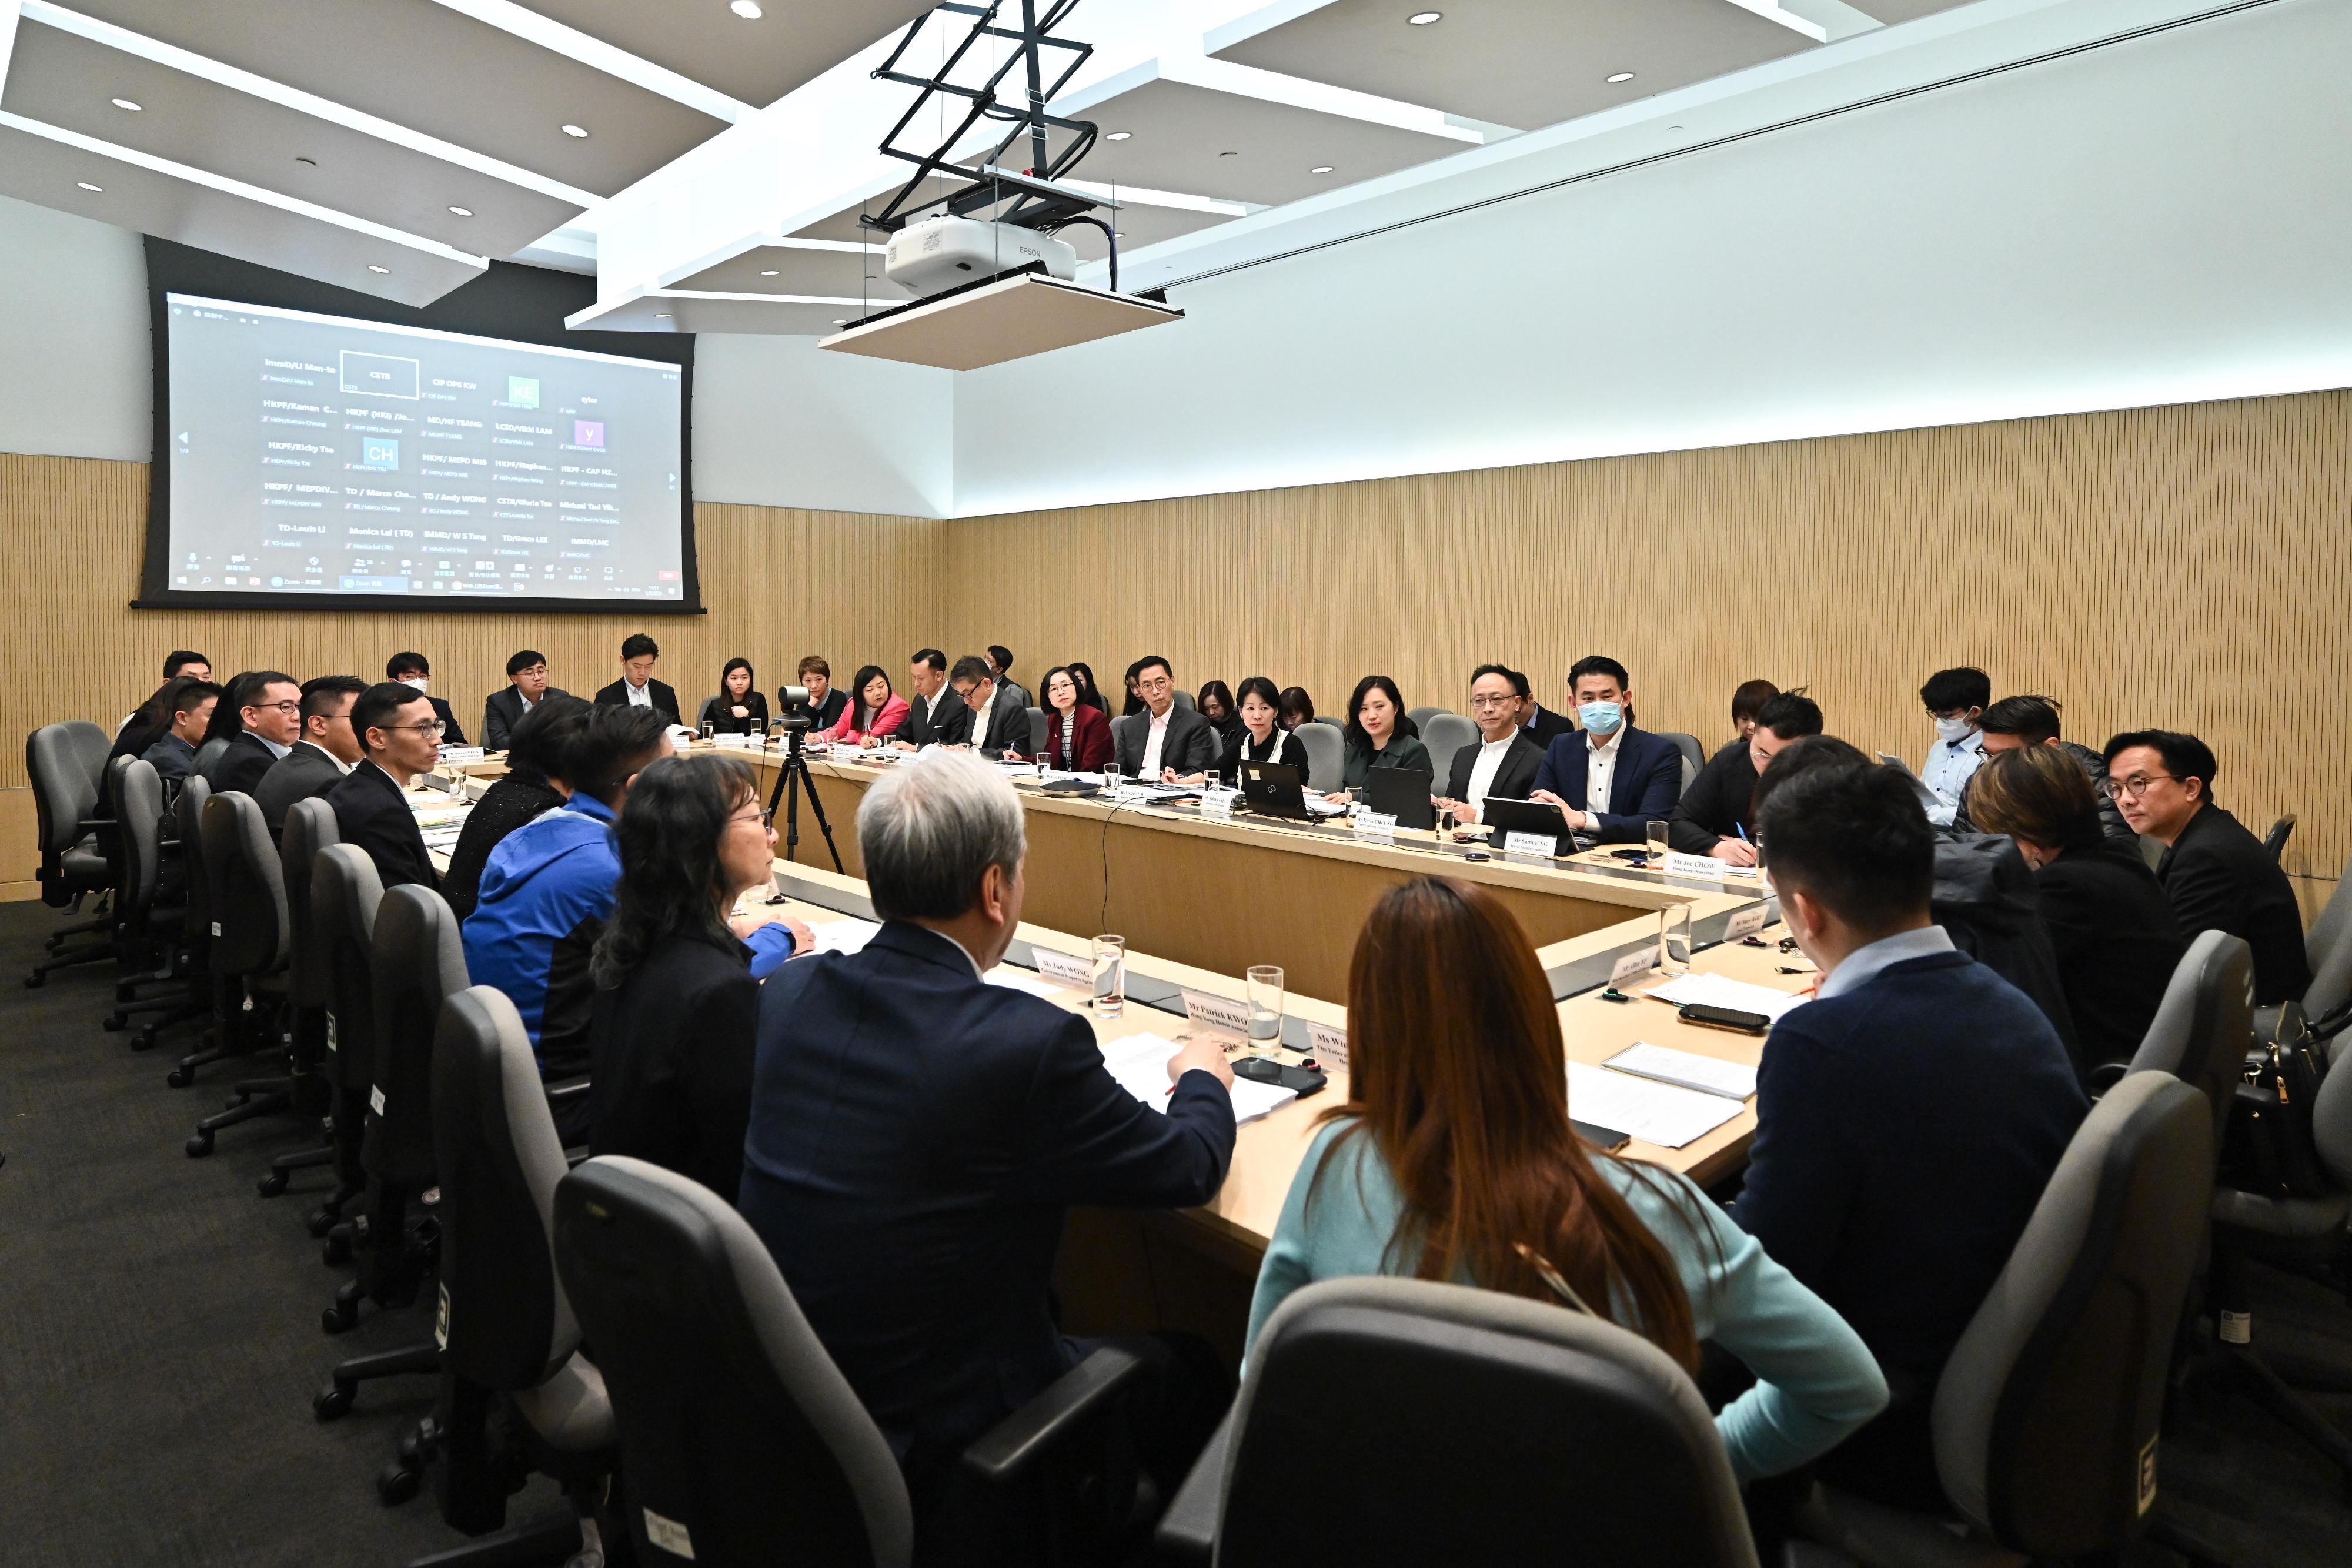 The Culture, Sports and Tourism Bureau convened a meeting today (February 1) to co-ordinate preparation for visitor arrivals to Hong Kong during Chinese New Year Golden Week of the Mainland. Representatives of various units discussed the arrangements for visitor arrivals at the meeting.